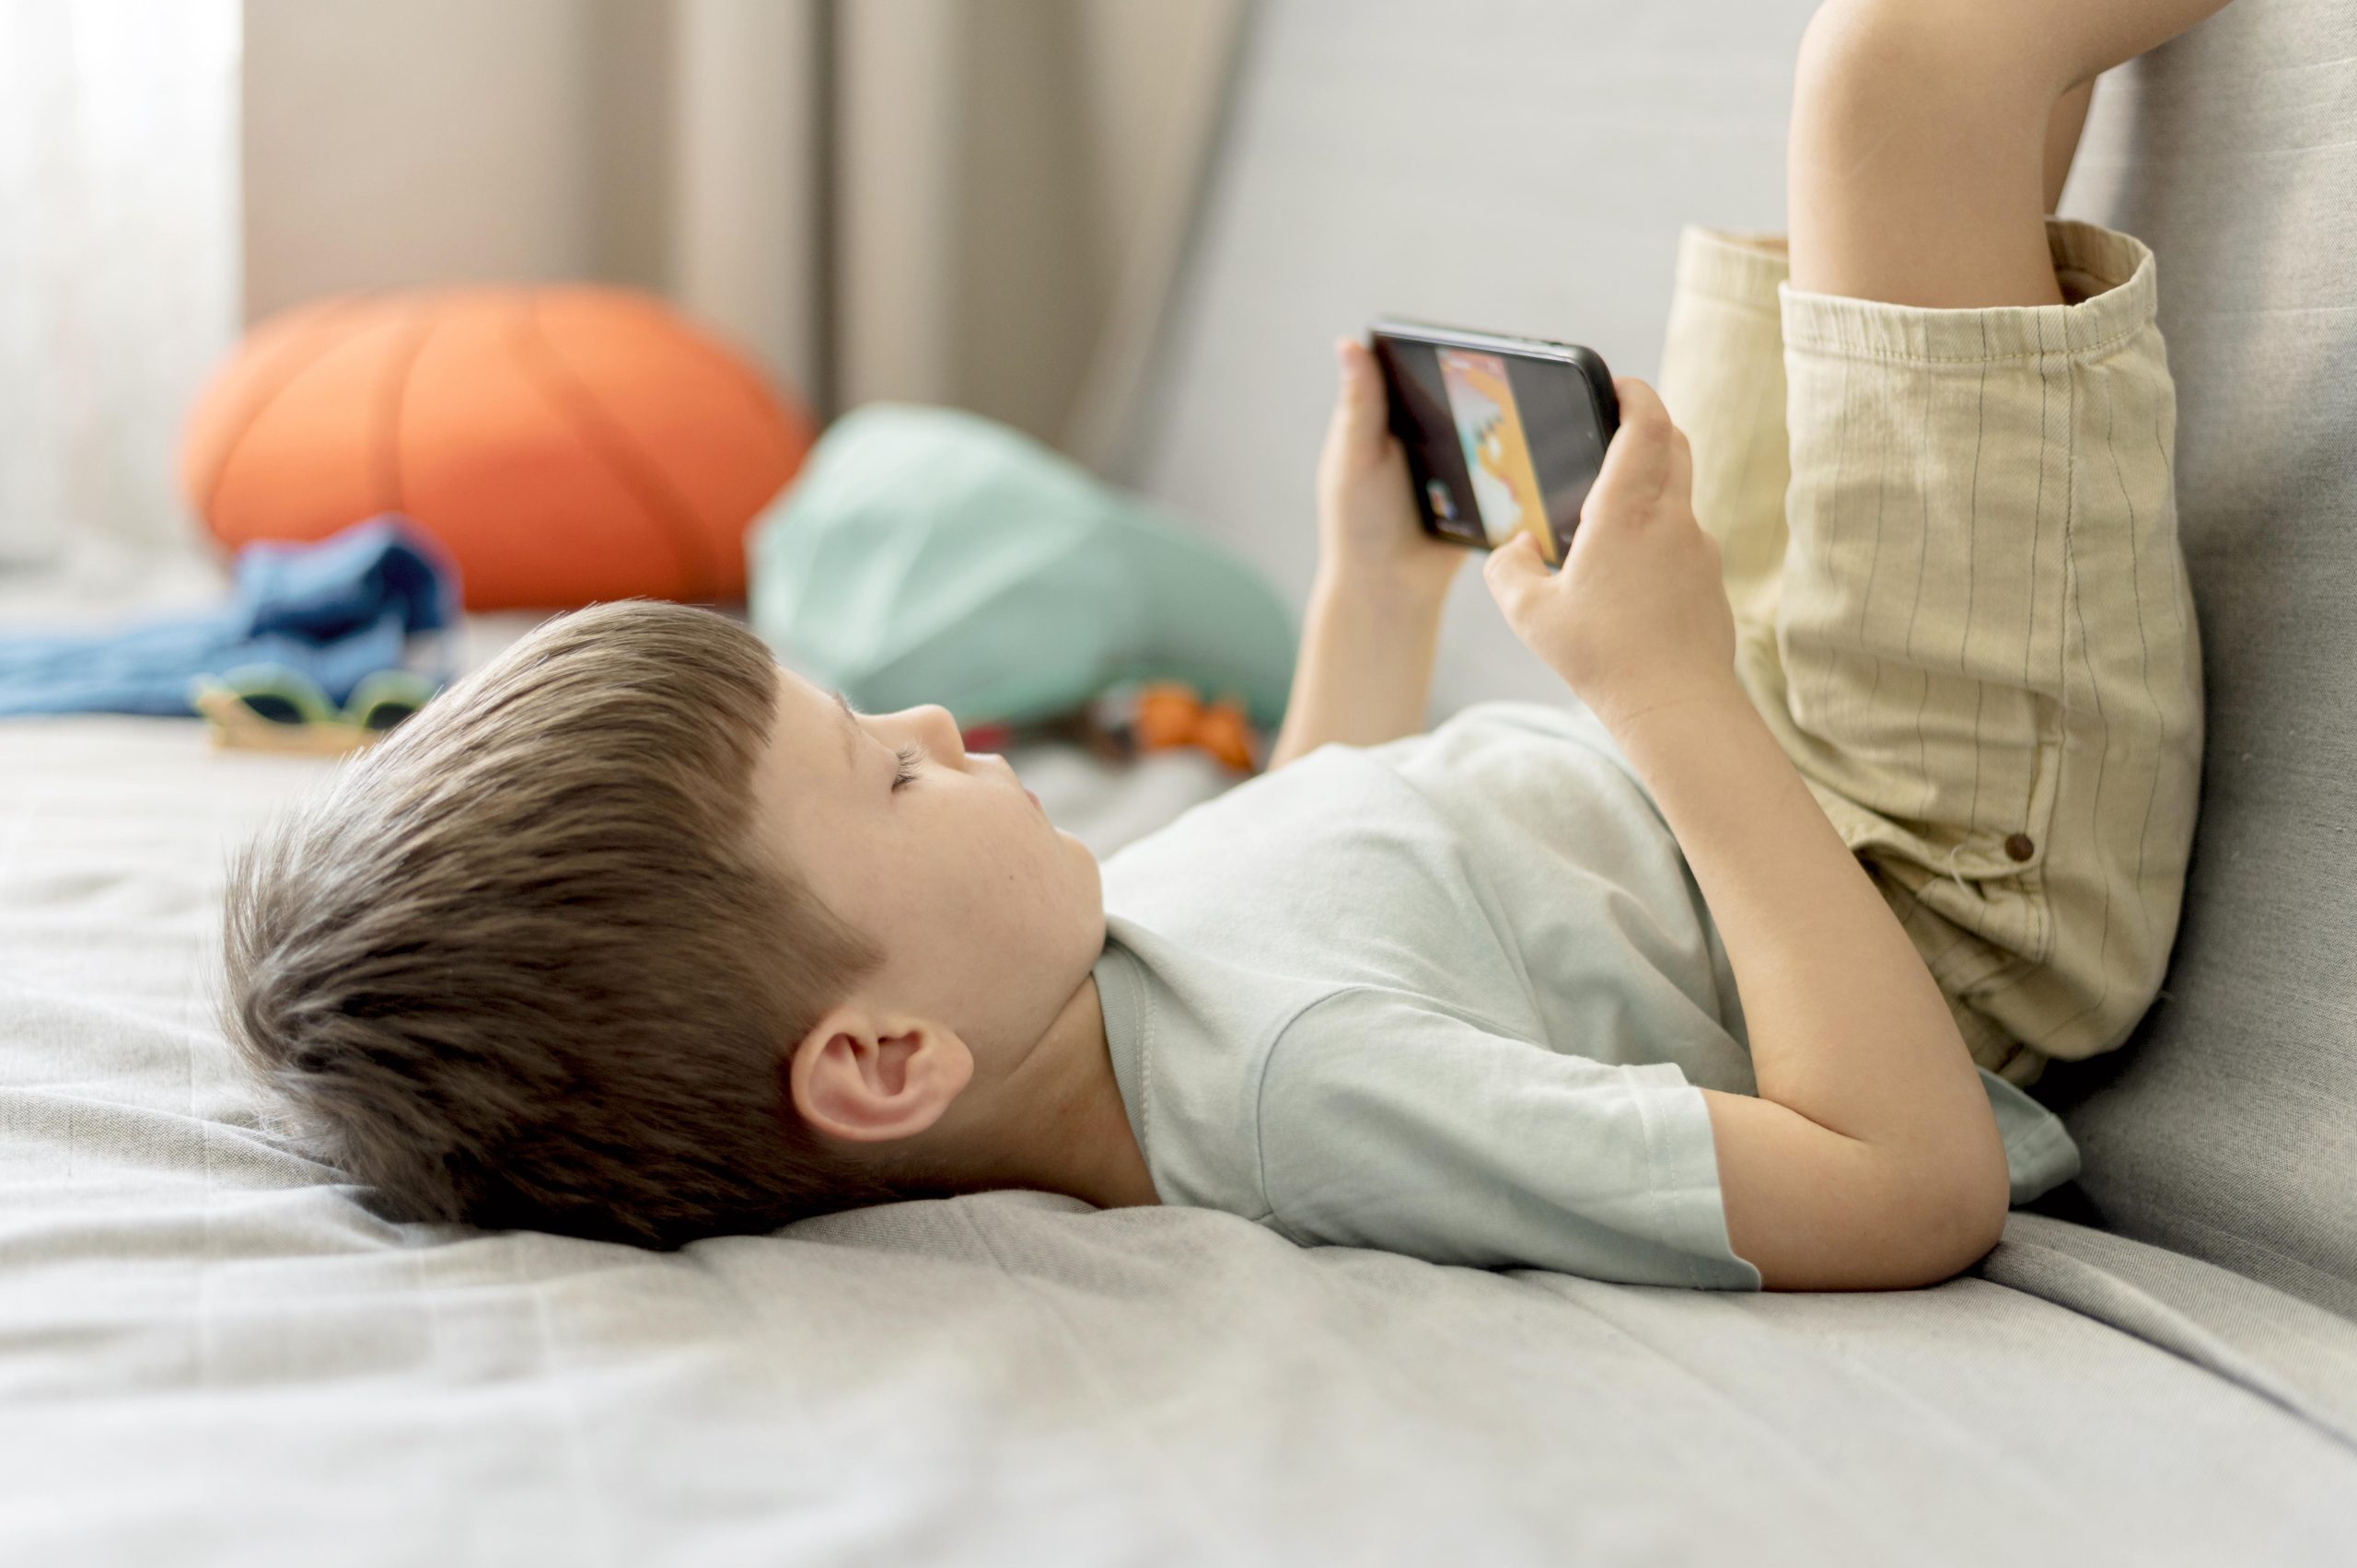 How to Monitor and Control Your Children's Mobile Device Usage 